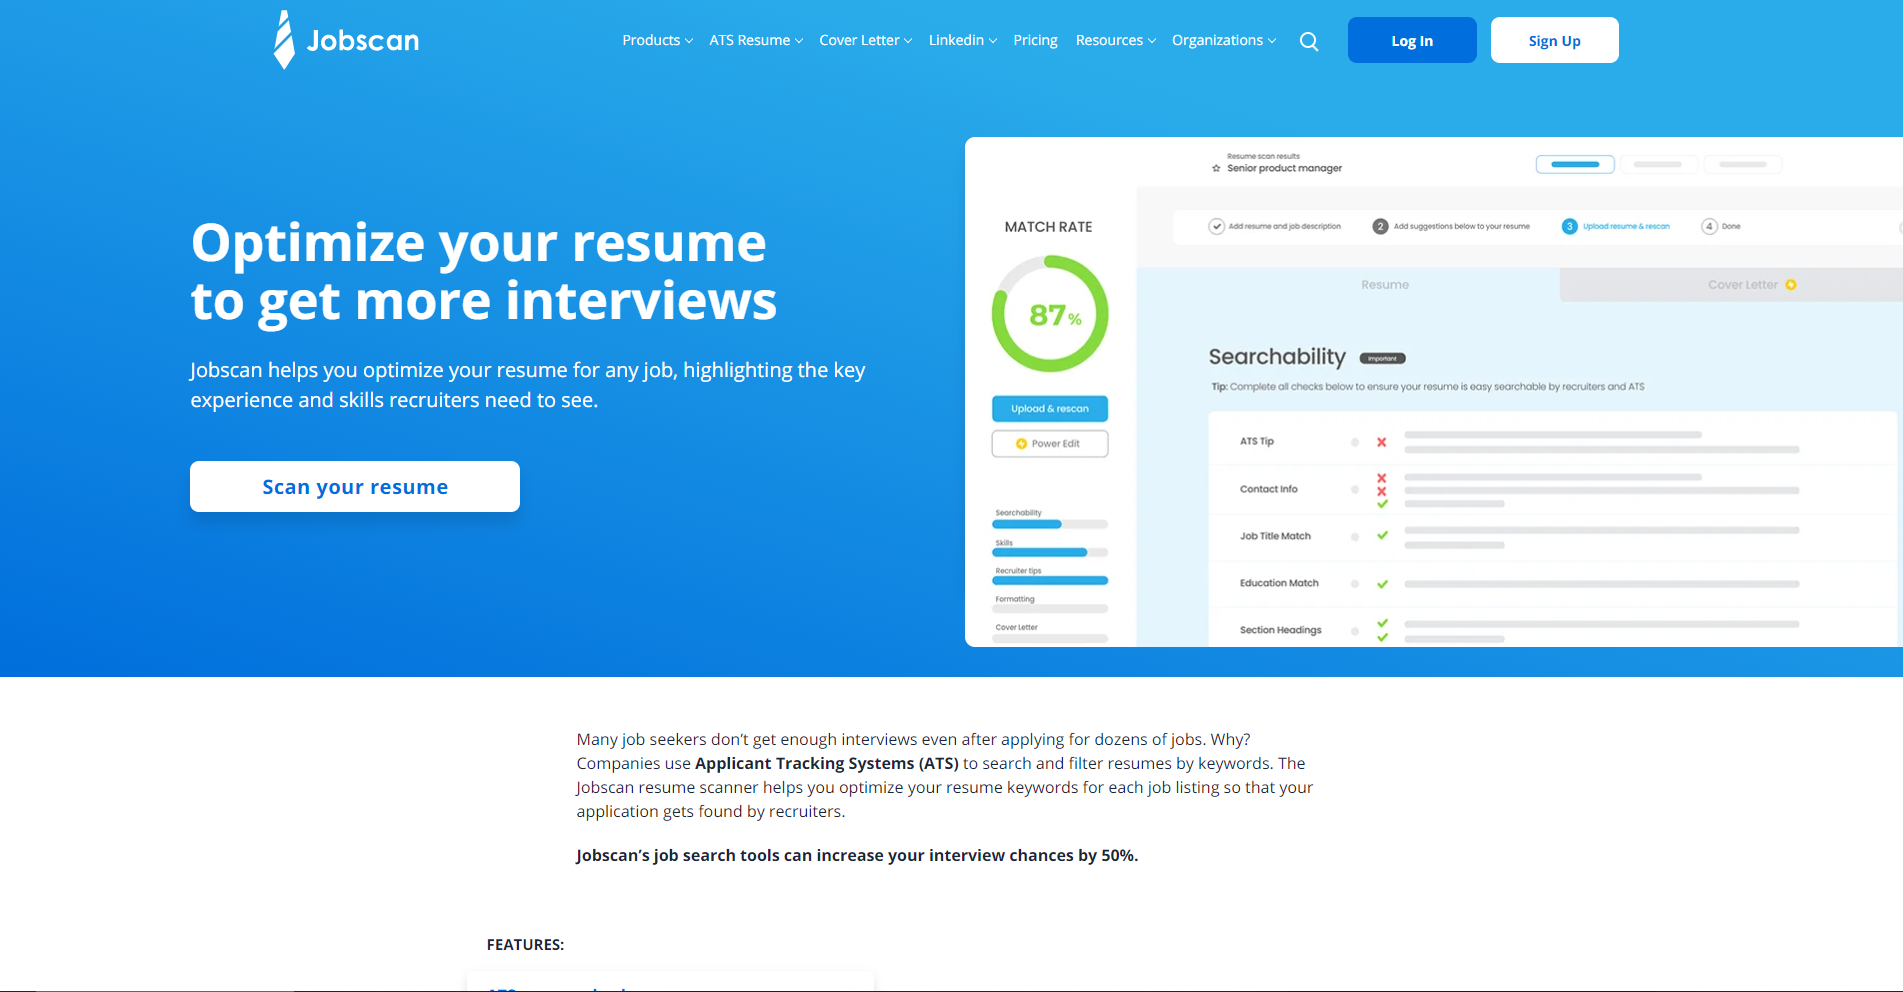 Optimize your resume, get more interviews